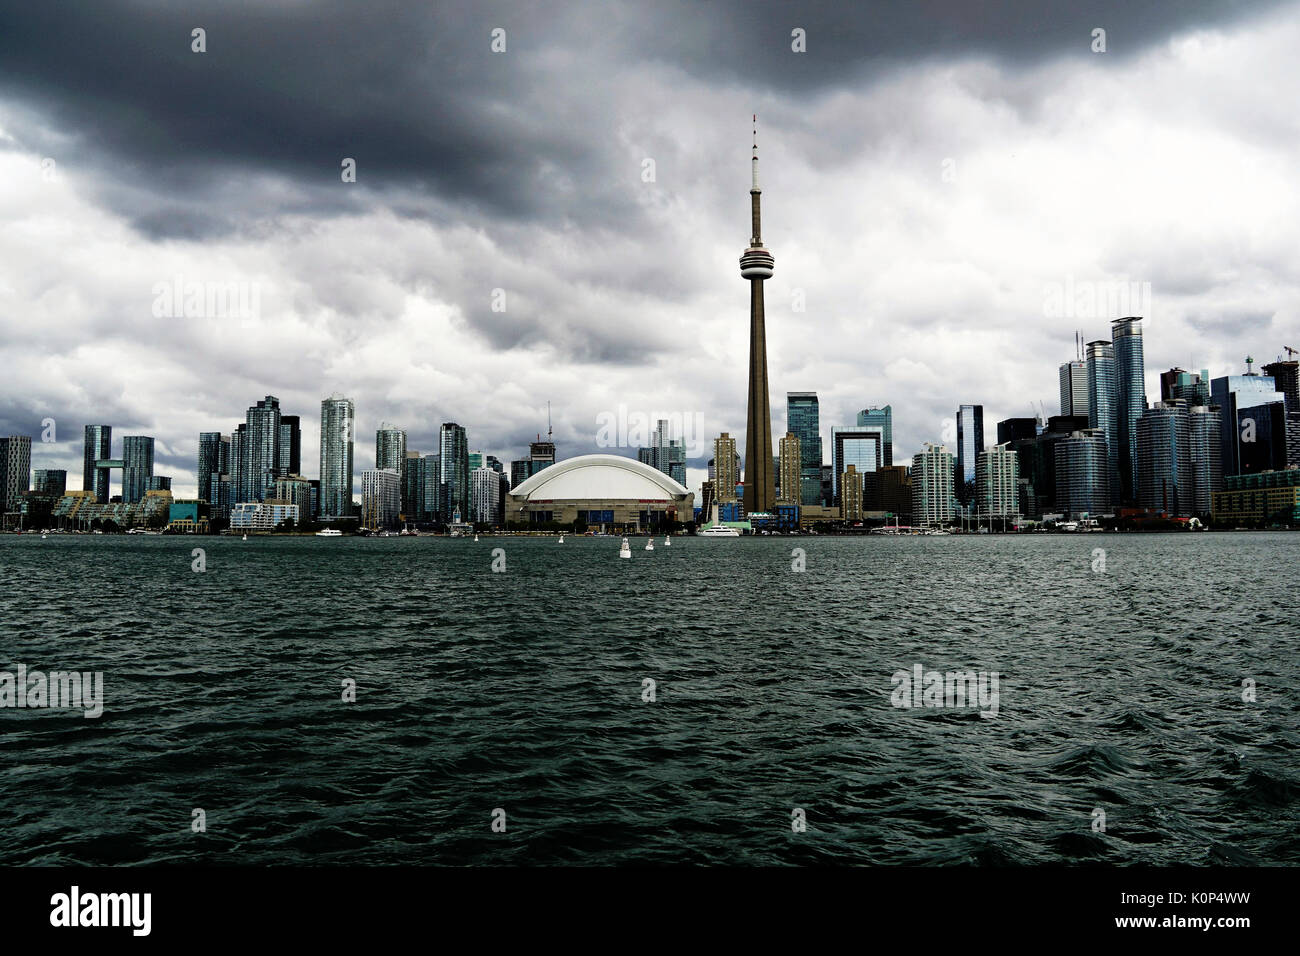 ocean view of toronto, otario canada cn tower and other skyscrapers/buildings against grey cloudy sky Stock Photo